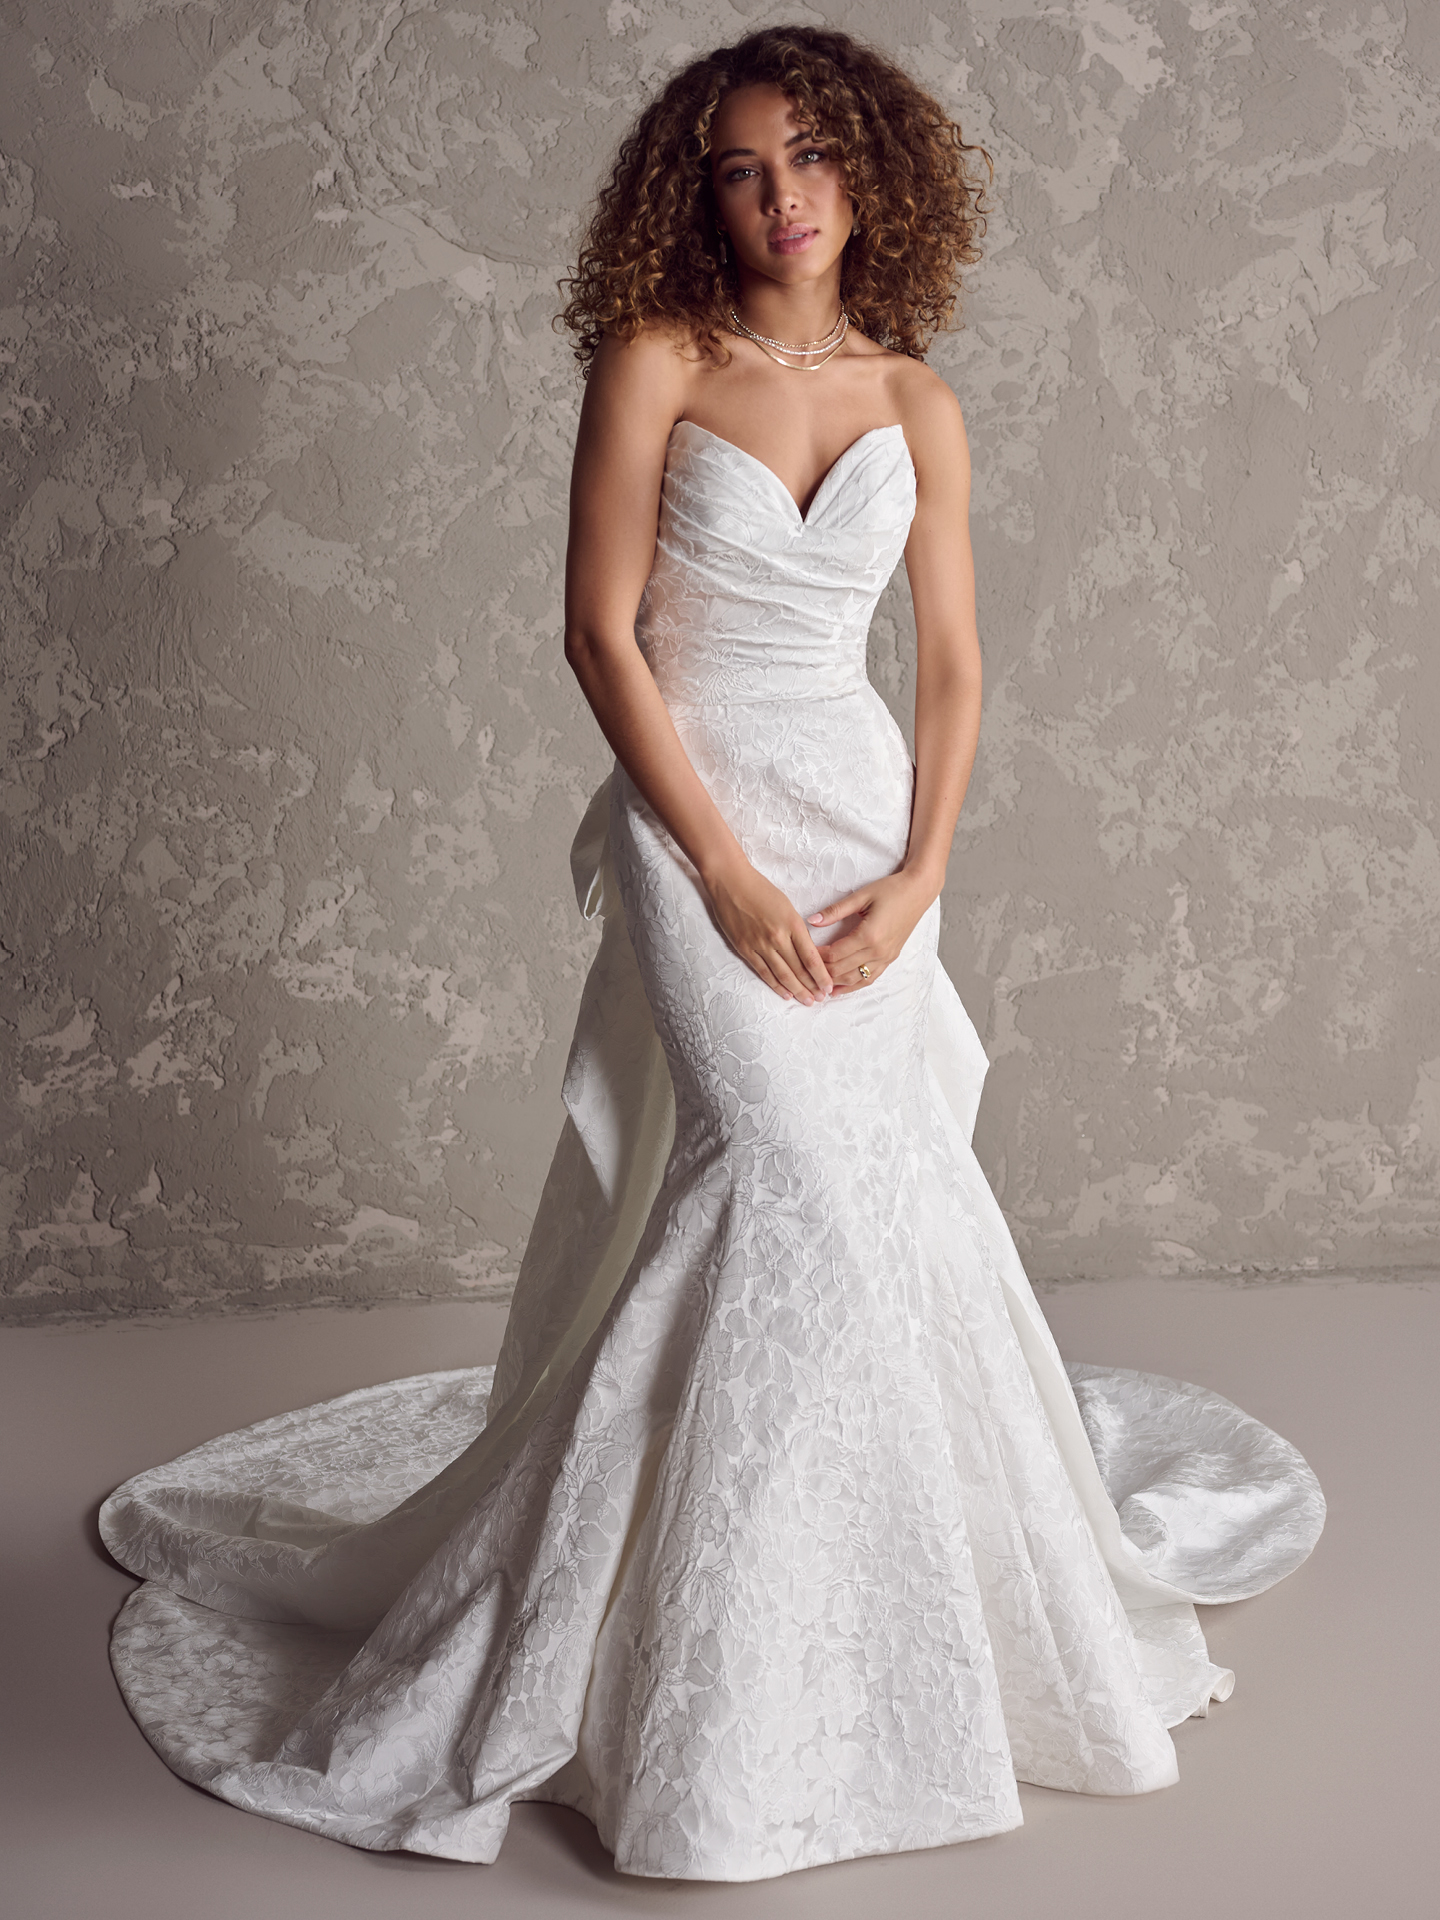 Strapless Jacquard Fit-and-Flare Gown by Maggie Sottero - Image 3